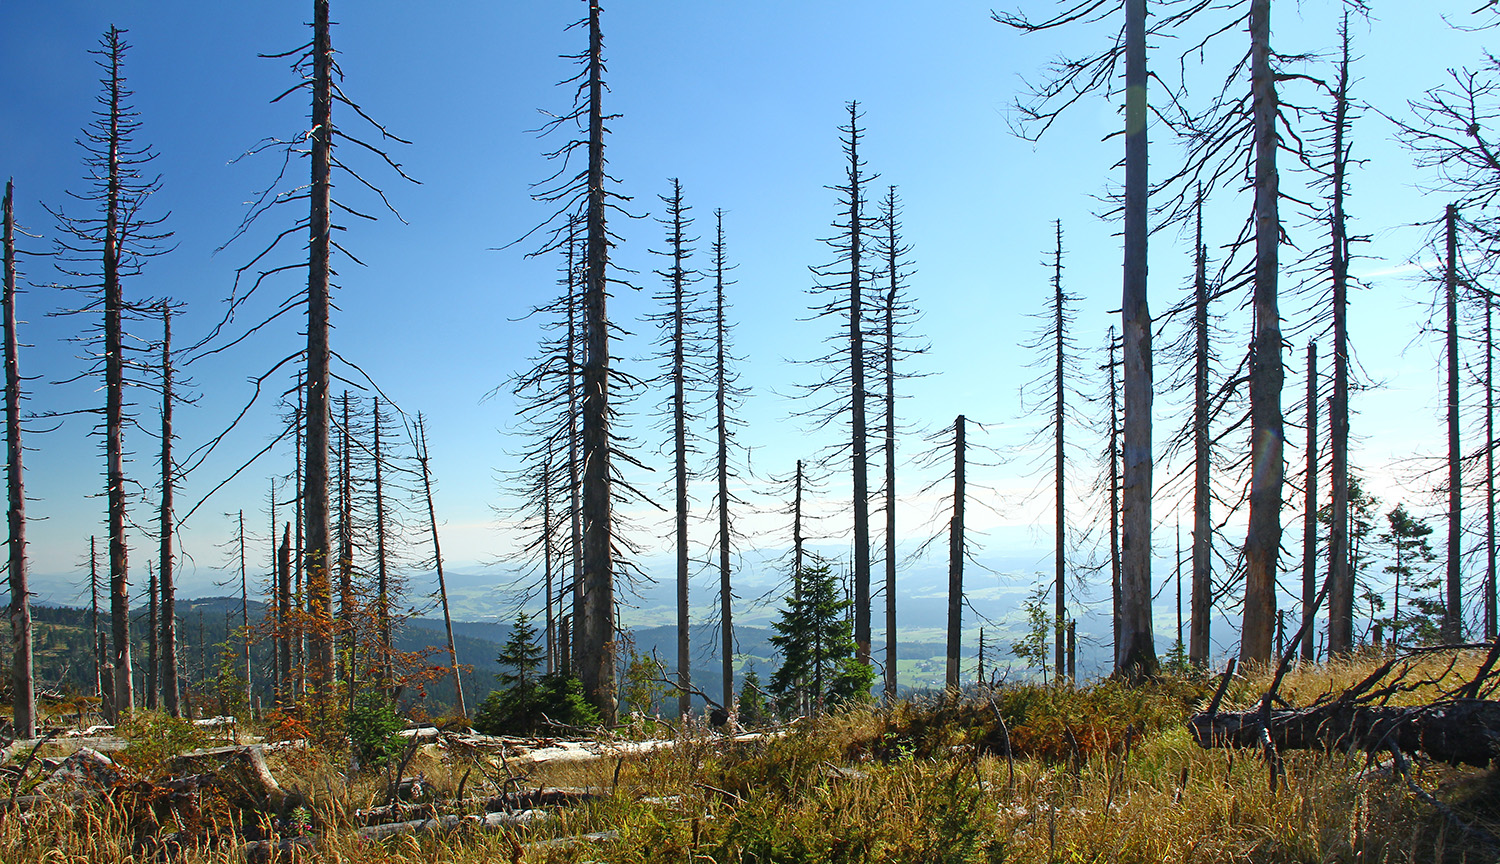 Photograph shows landscape of dead conifer trees with mountains behind them.